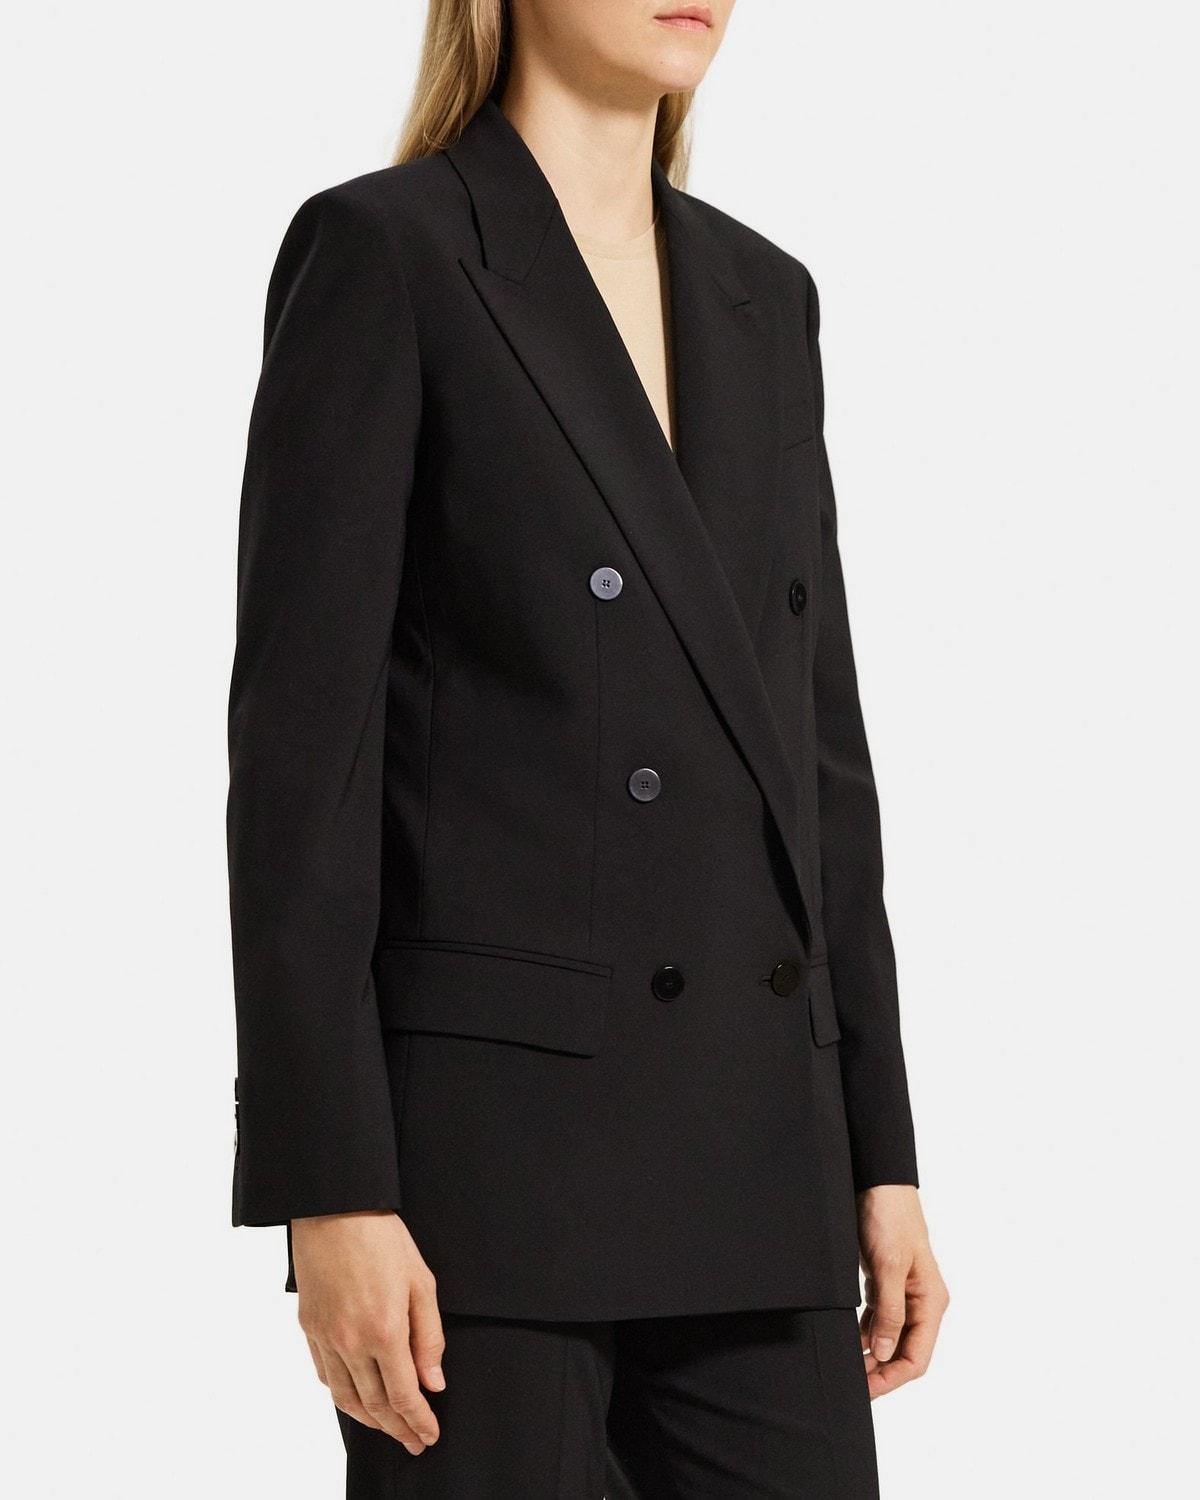 Double-Breasted Jacket in Sevona Stretch Wool